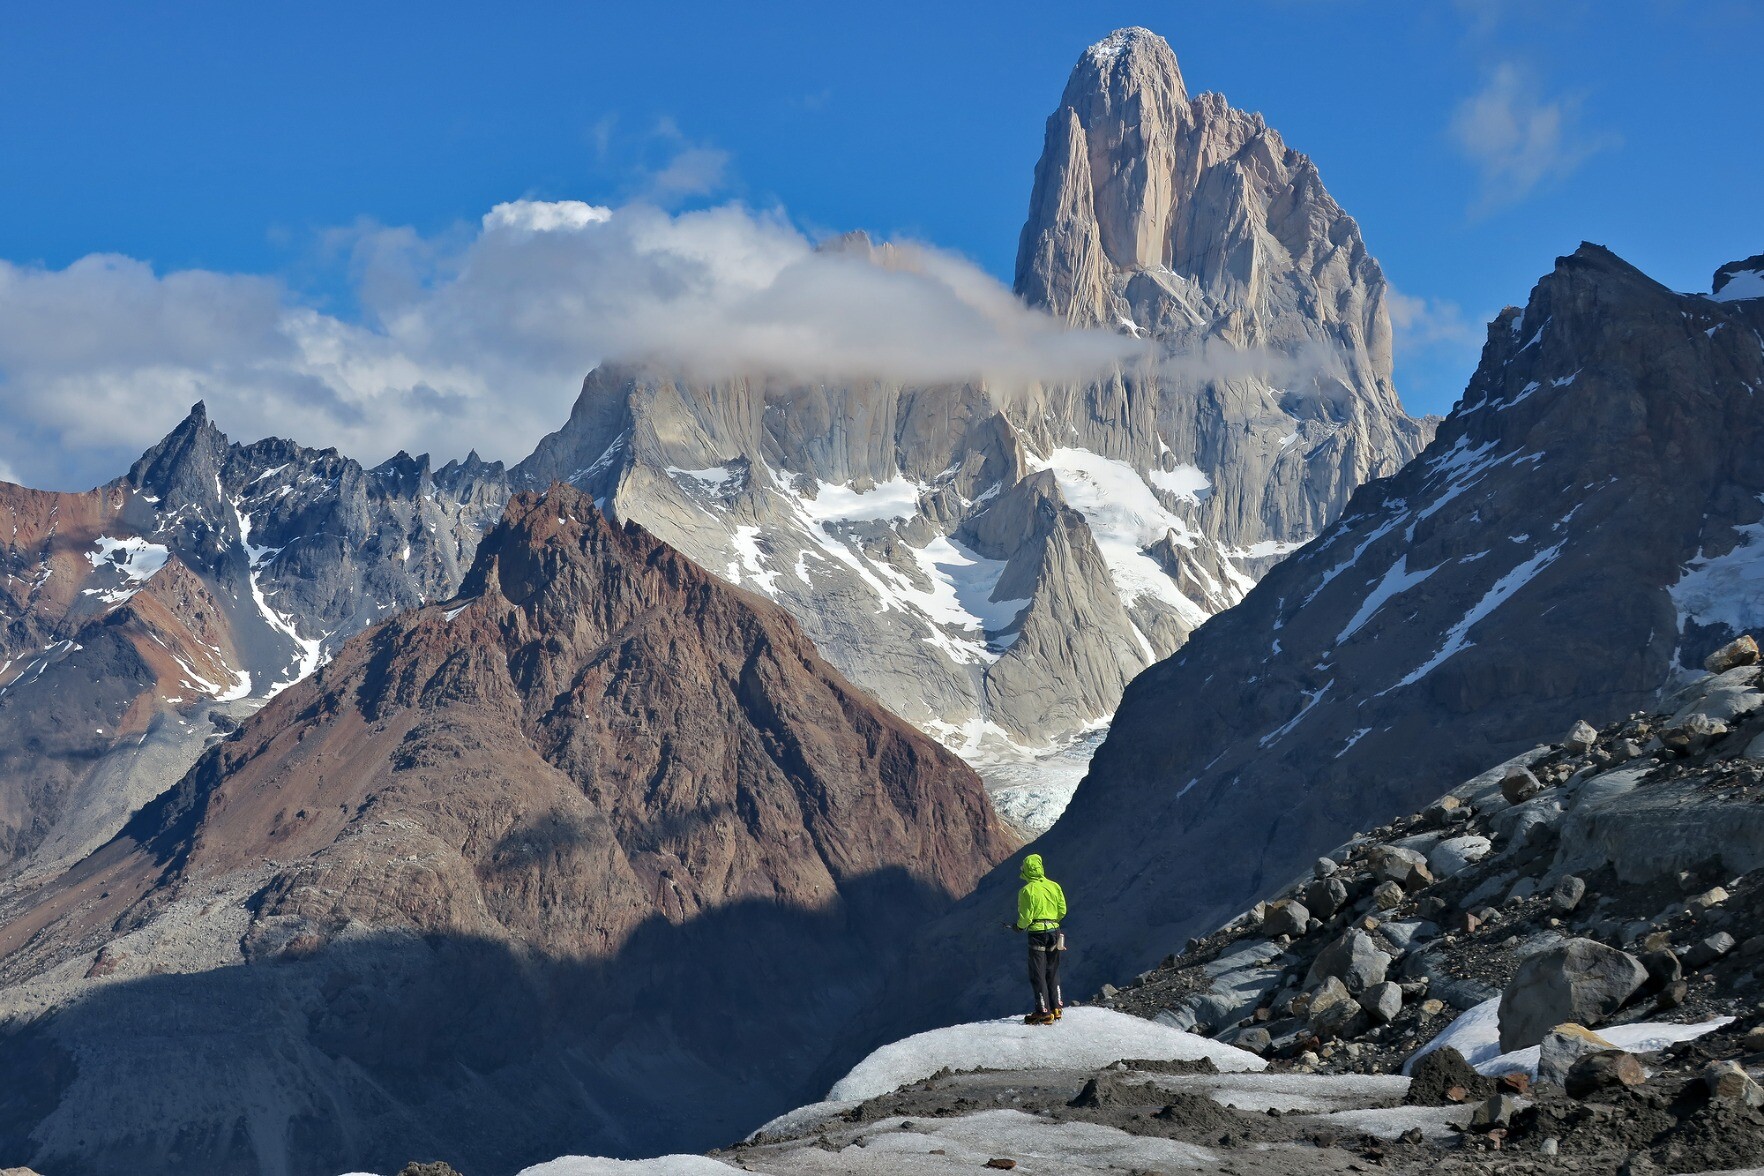 A man with green jacket is stood on a small rise below the giant mountain of Mt Fitzroy in Patagonia. Blue skies all around